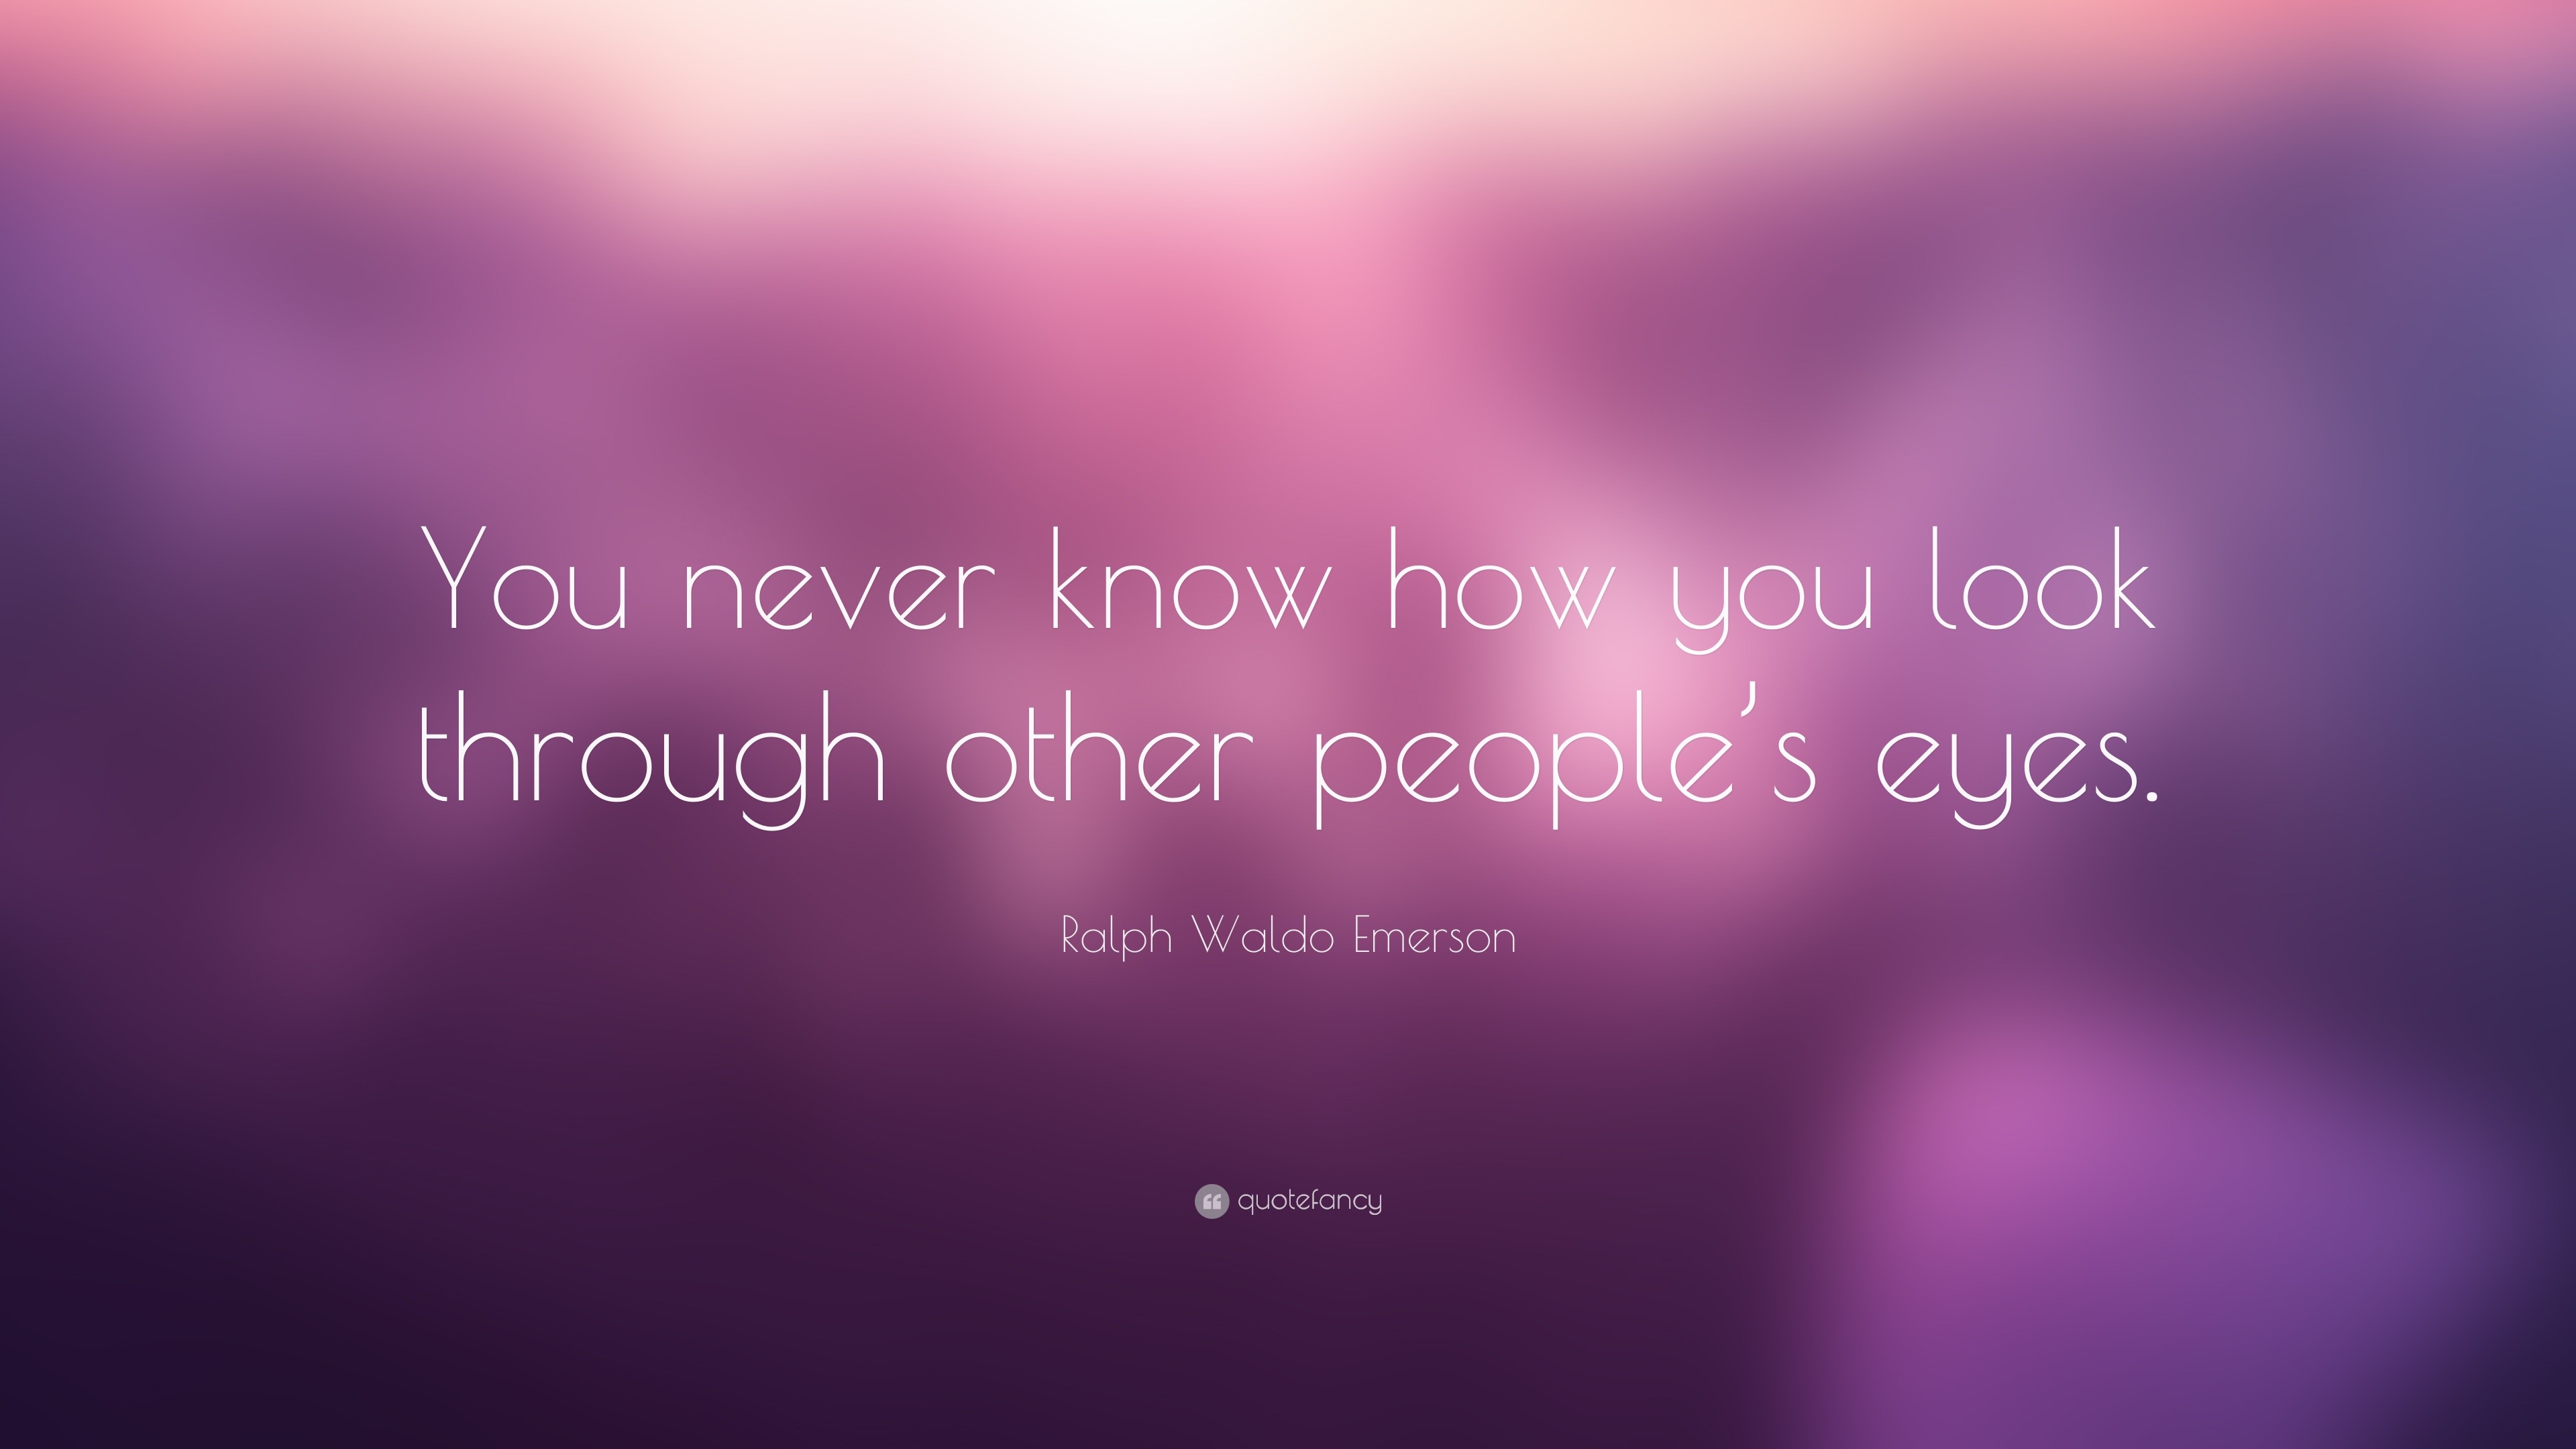 Ralph Waldo Emerson Quote: “You never know how you look through other ...